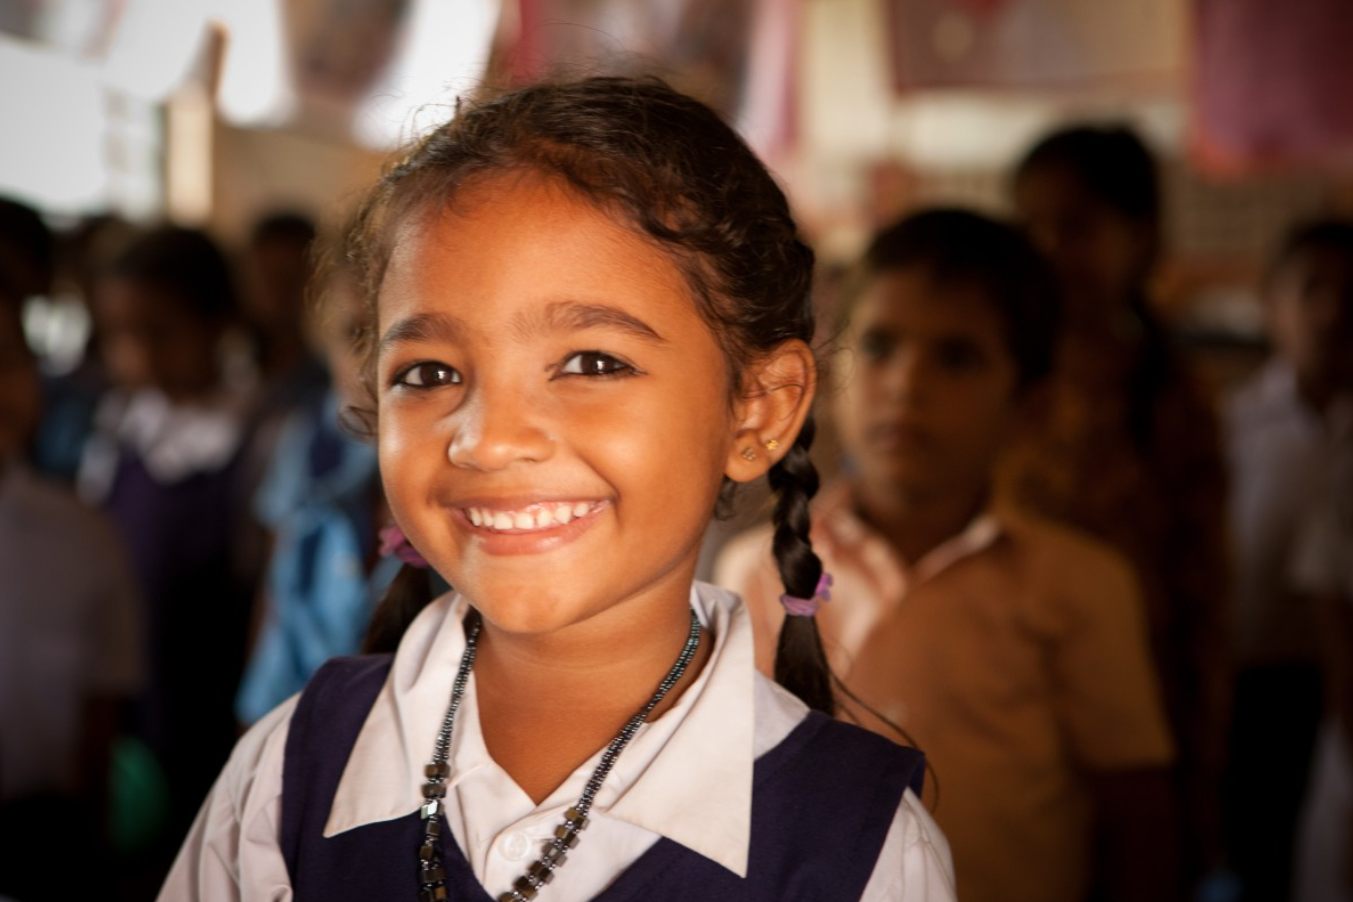 Let’s send girls back to the classroom with Mission: Every Girl in School!